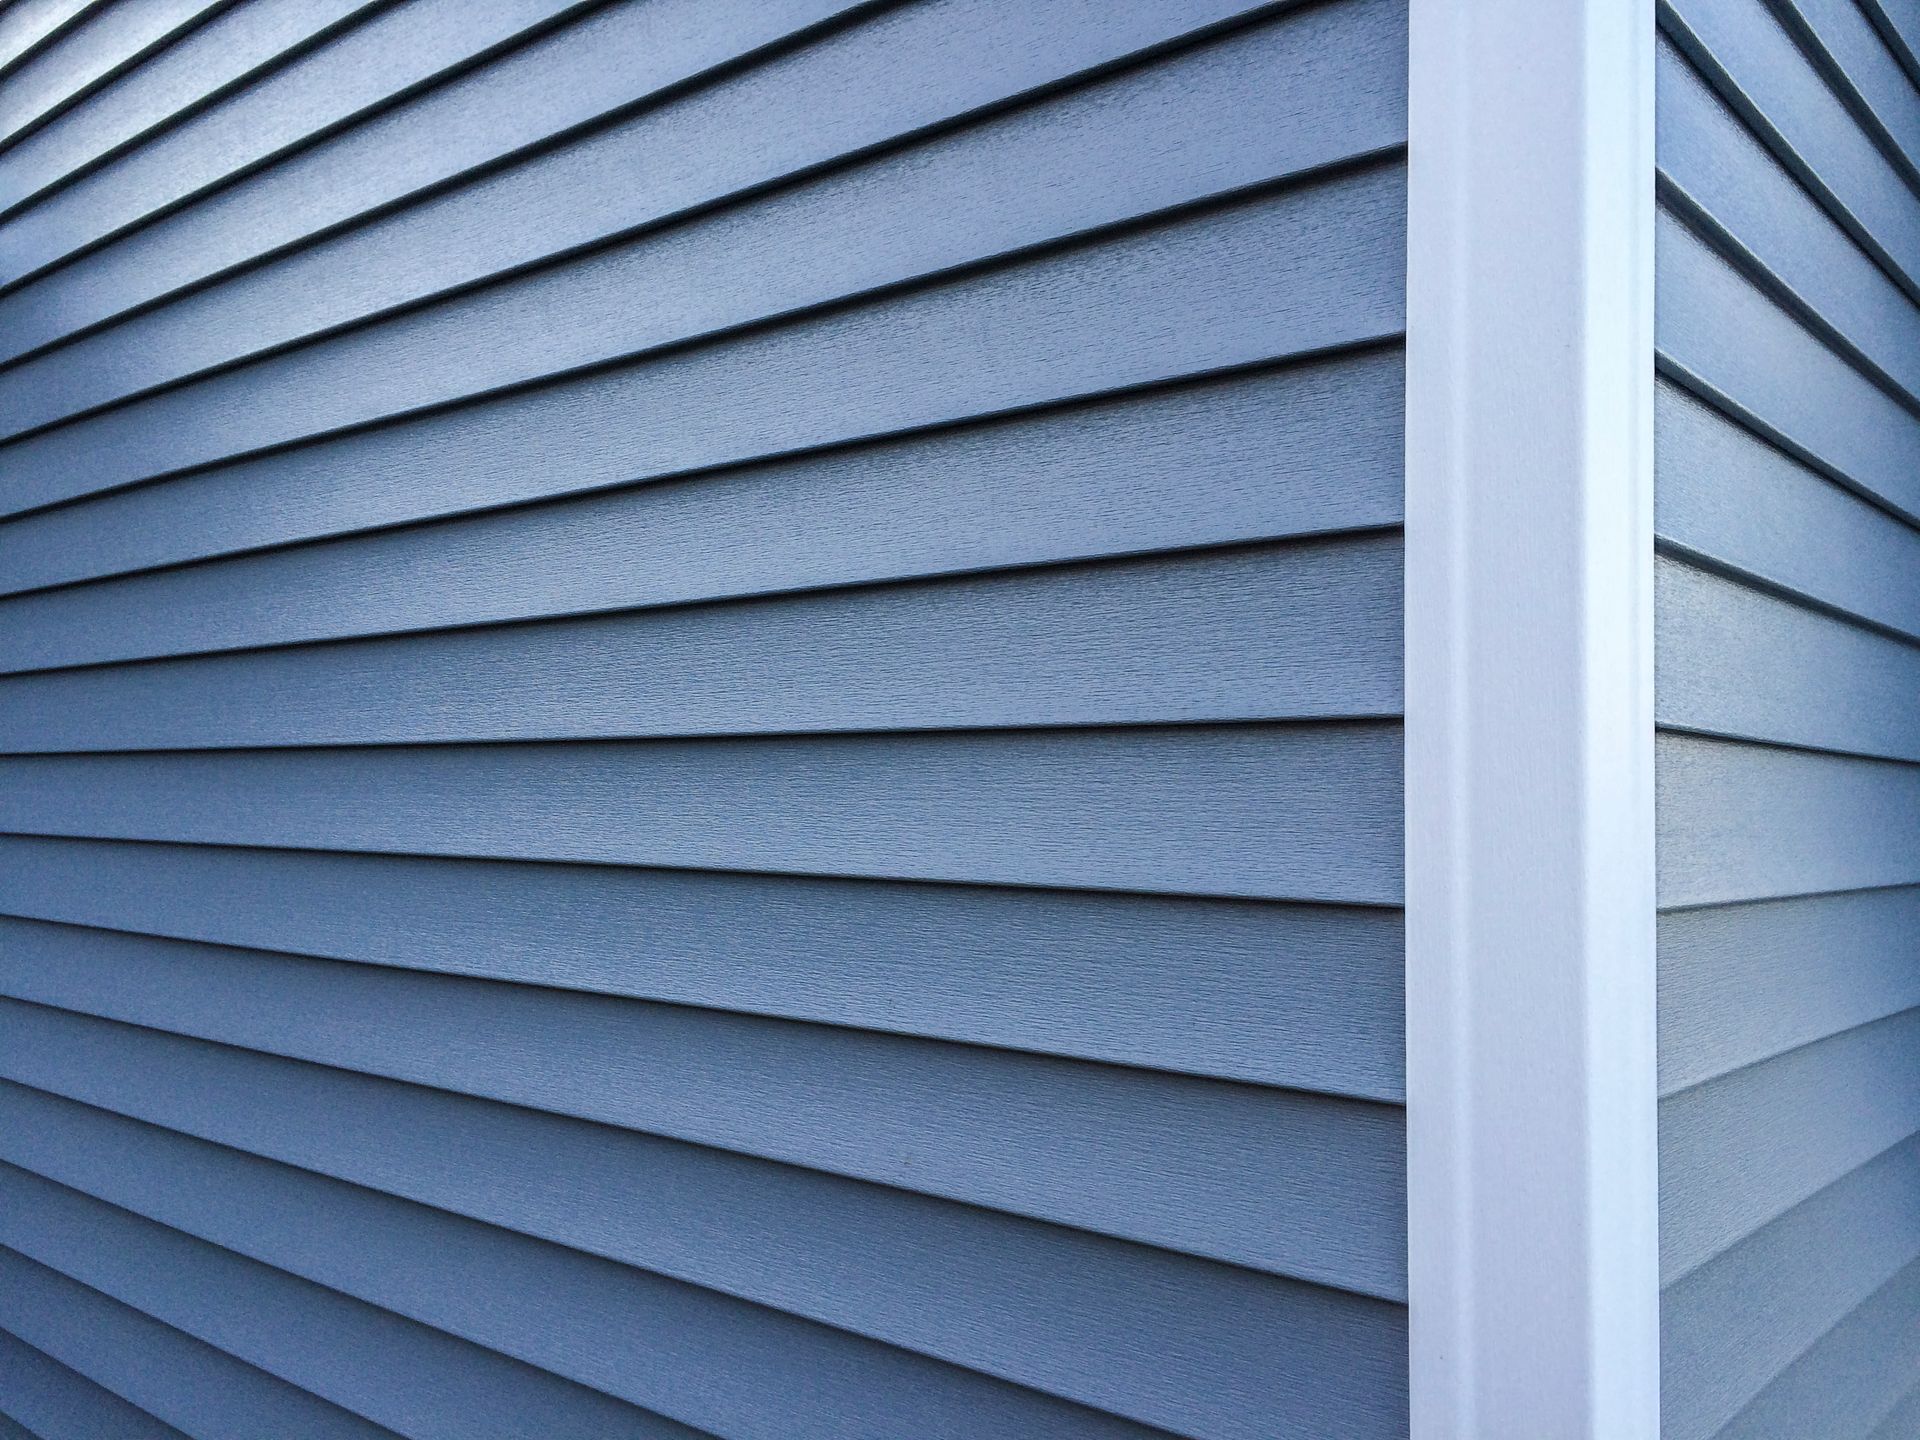 Siding services in Coquitlam, BC